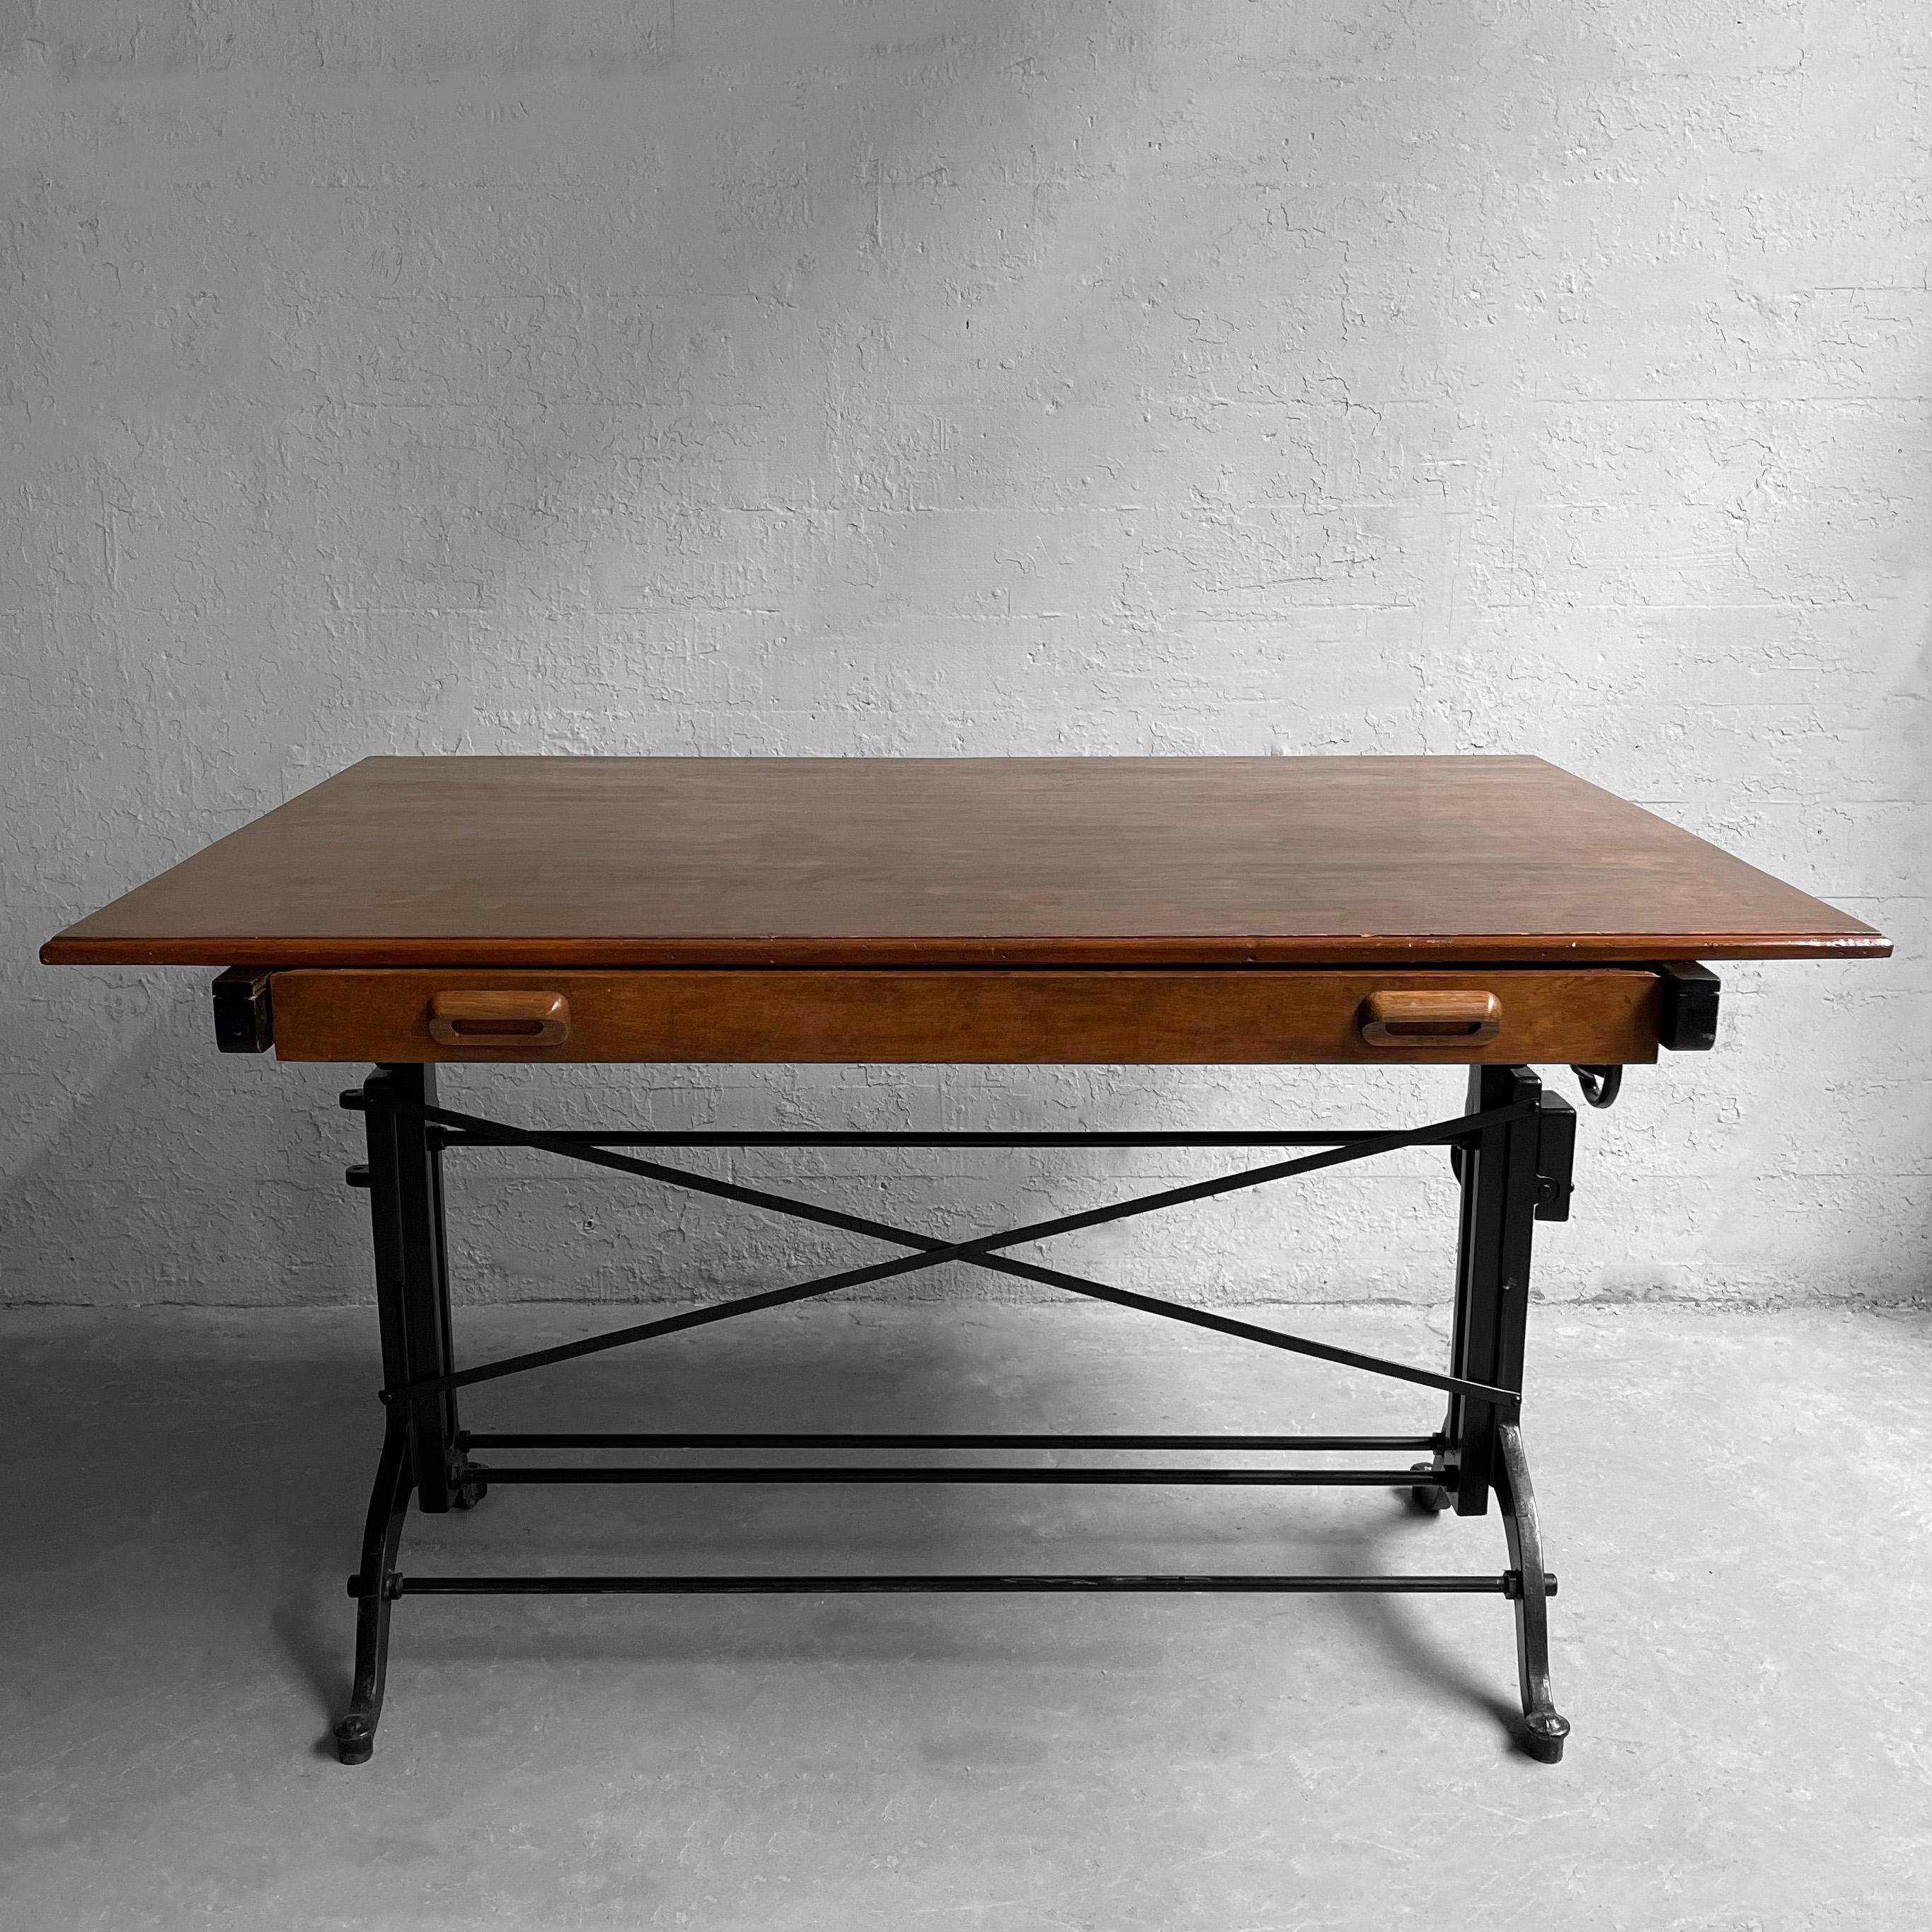 Early 20th Century Cast Iron Maple Drafting Table by Frederick Post Co 1